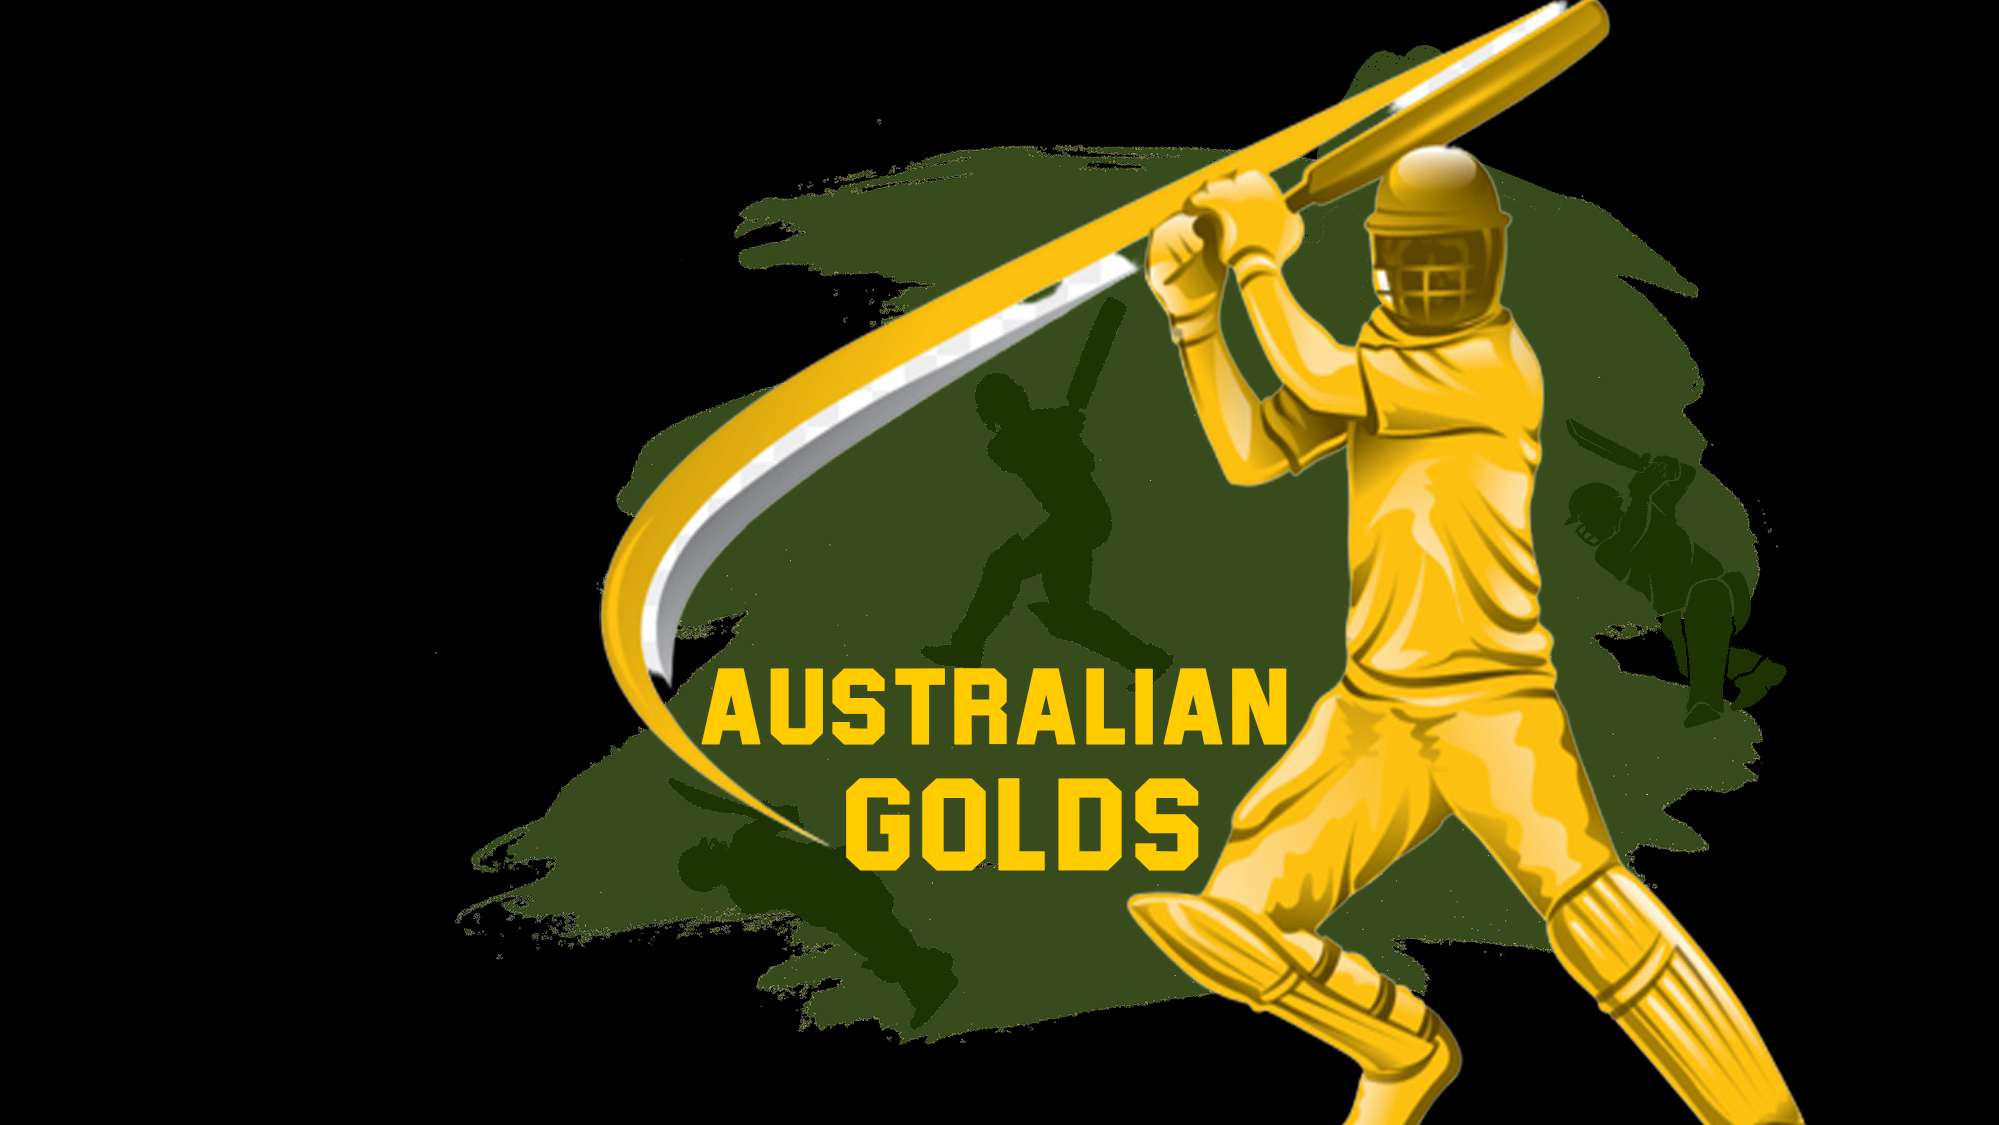 Australian Golds squad unveiled for the inaugural GPCL season